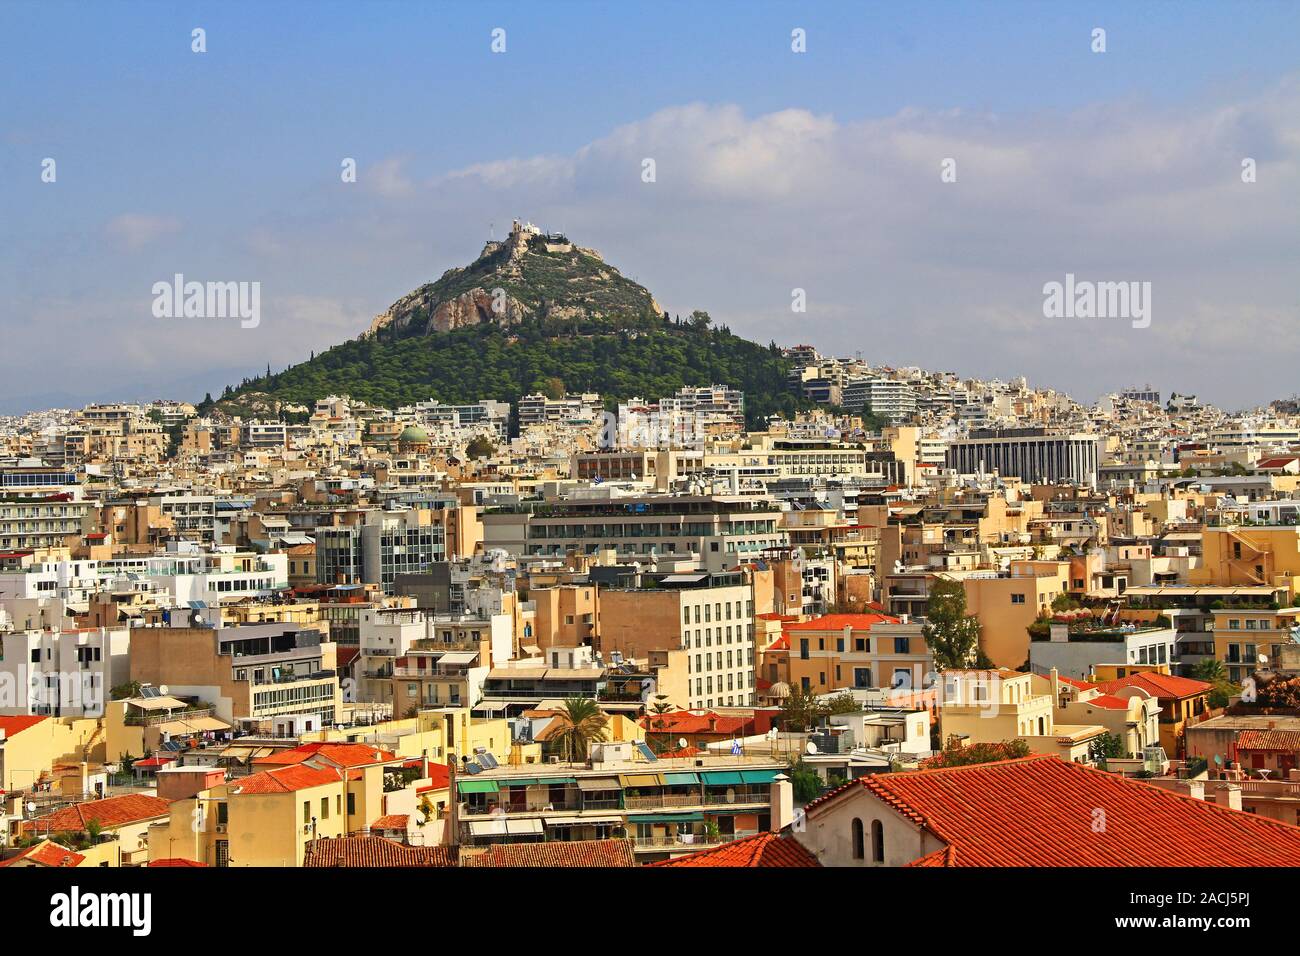 View of Mount Lycabettus and the City of Athens, Greece Stock Photo